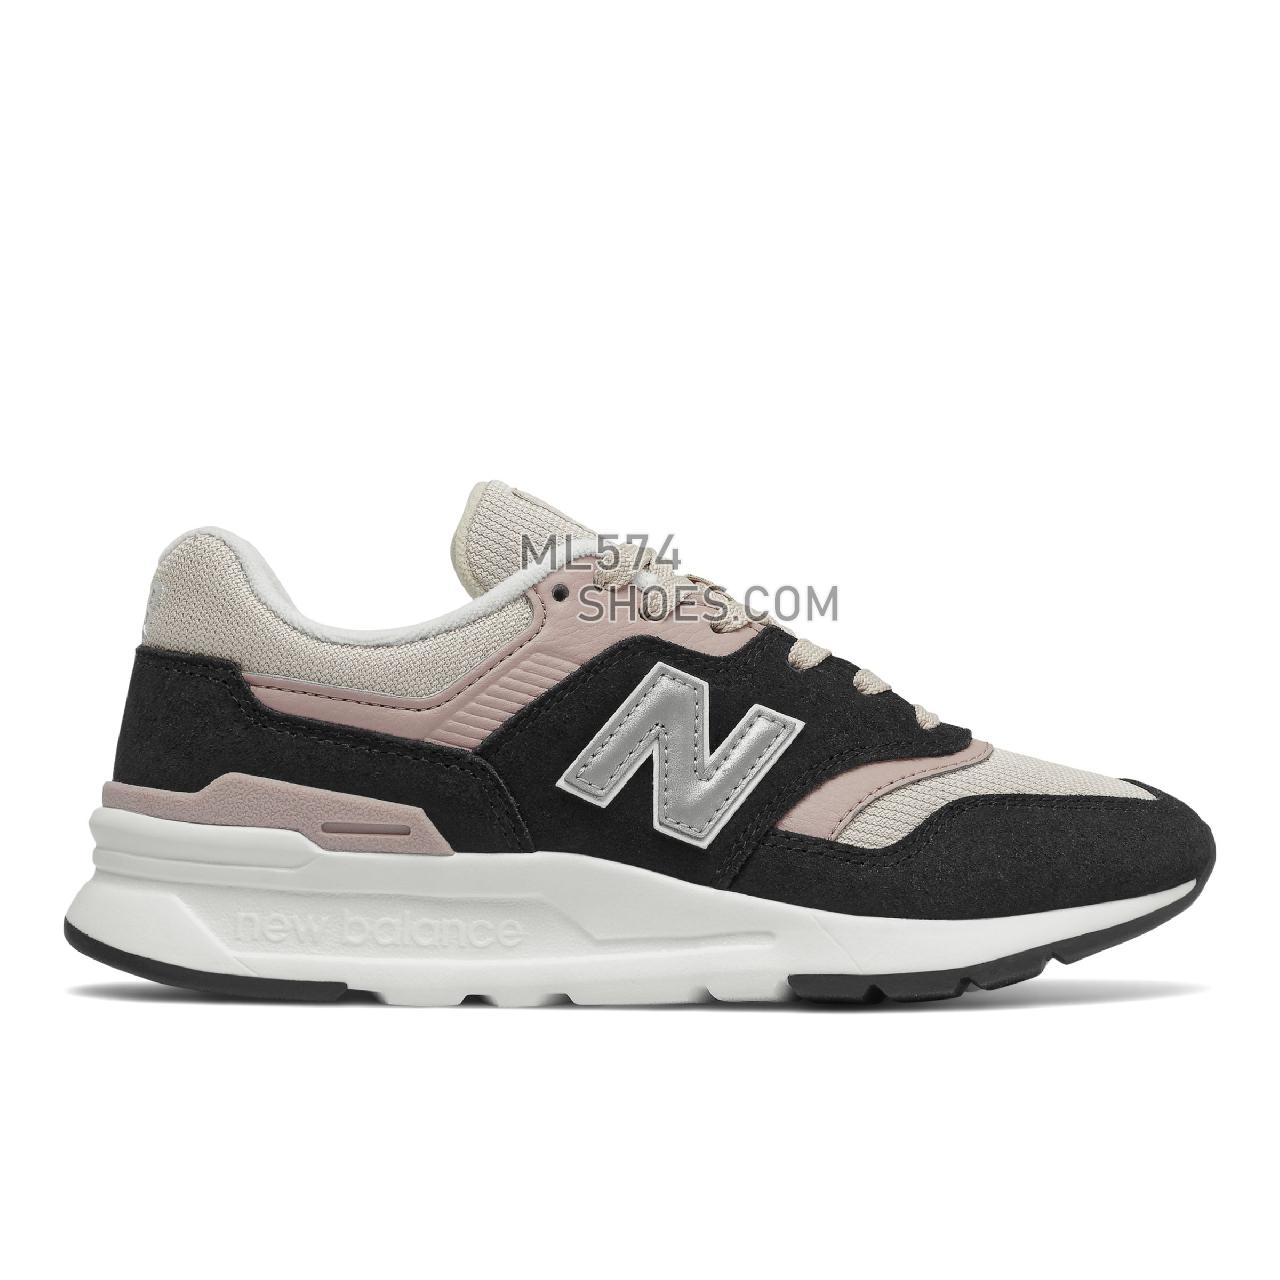 New Balance 997H - Women's Classic Sneakers - Black with White - CW997HTK